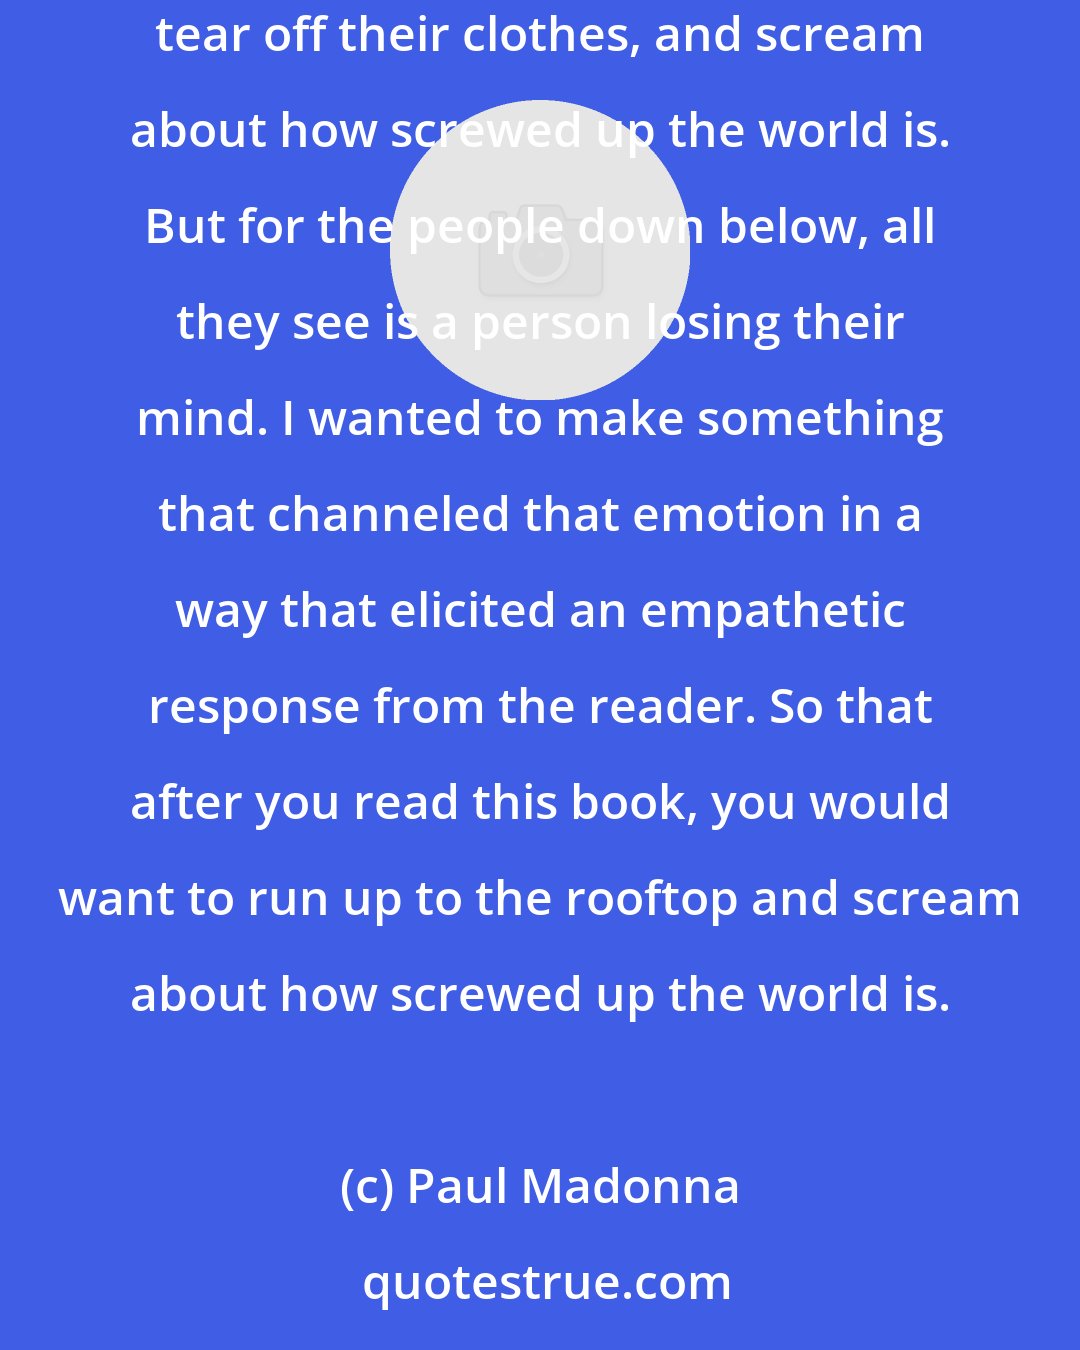 Paul Madonna: What I am most proud of with the book On to the Next Dream is how I turned an intensely emotional experience into art. Anyone can run up to a rooftop, tear off their clothes, and scream about how screwed up the world is. But for the people down below, all they see is a person losing their mind. I wanted to make something that channeled that emotion in a way that elicited an empathetic response from the reader. So that after you read this book, you would want to run up to the rooftop and scream about how screwed up the world is.